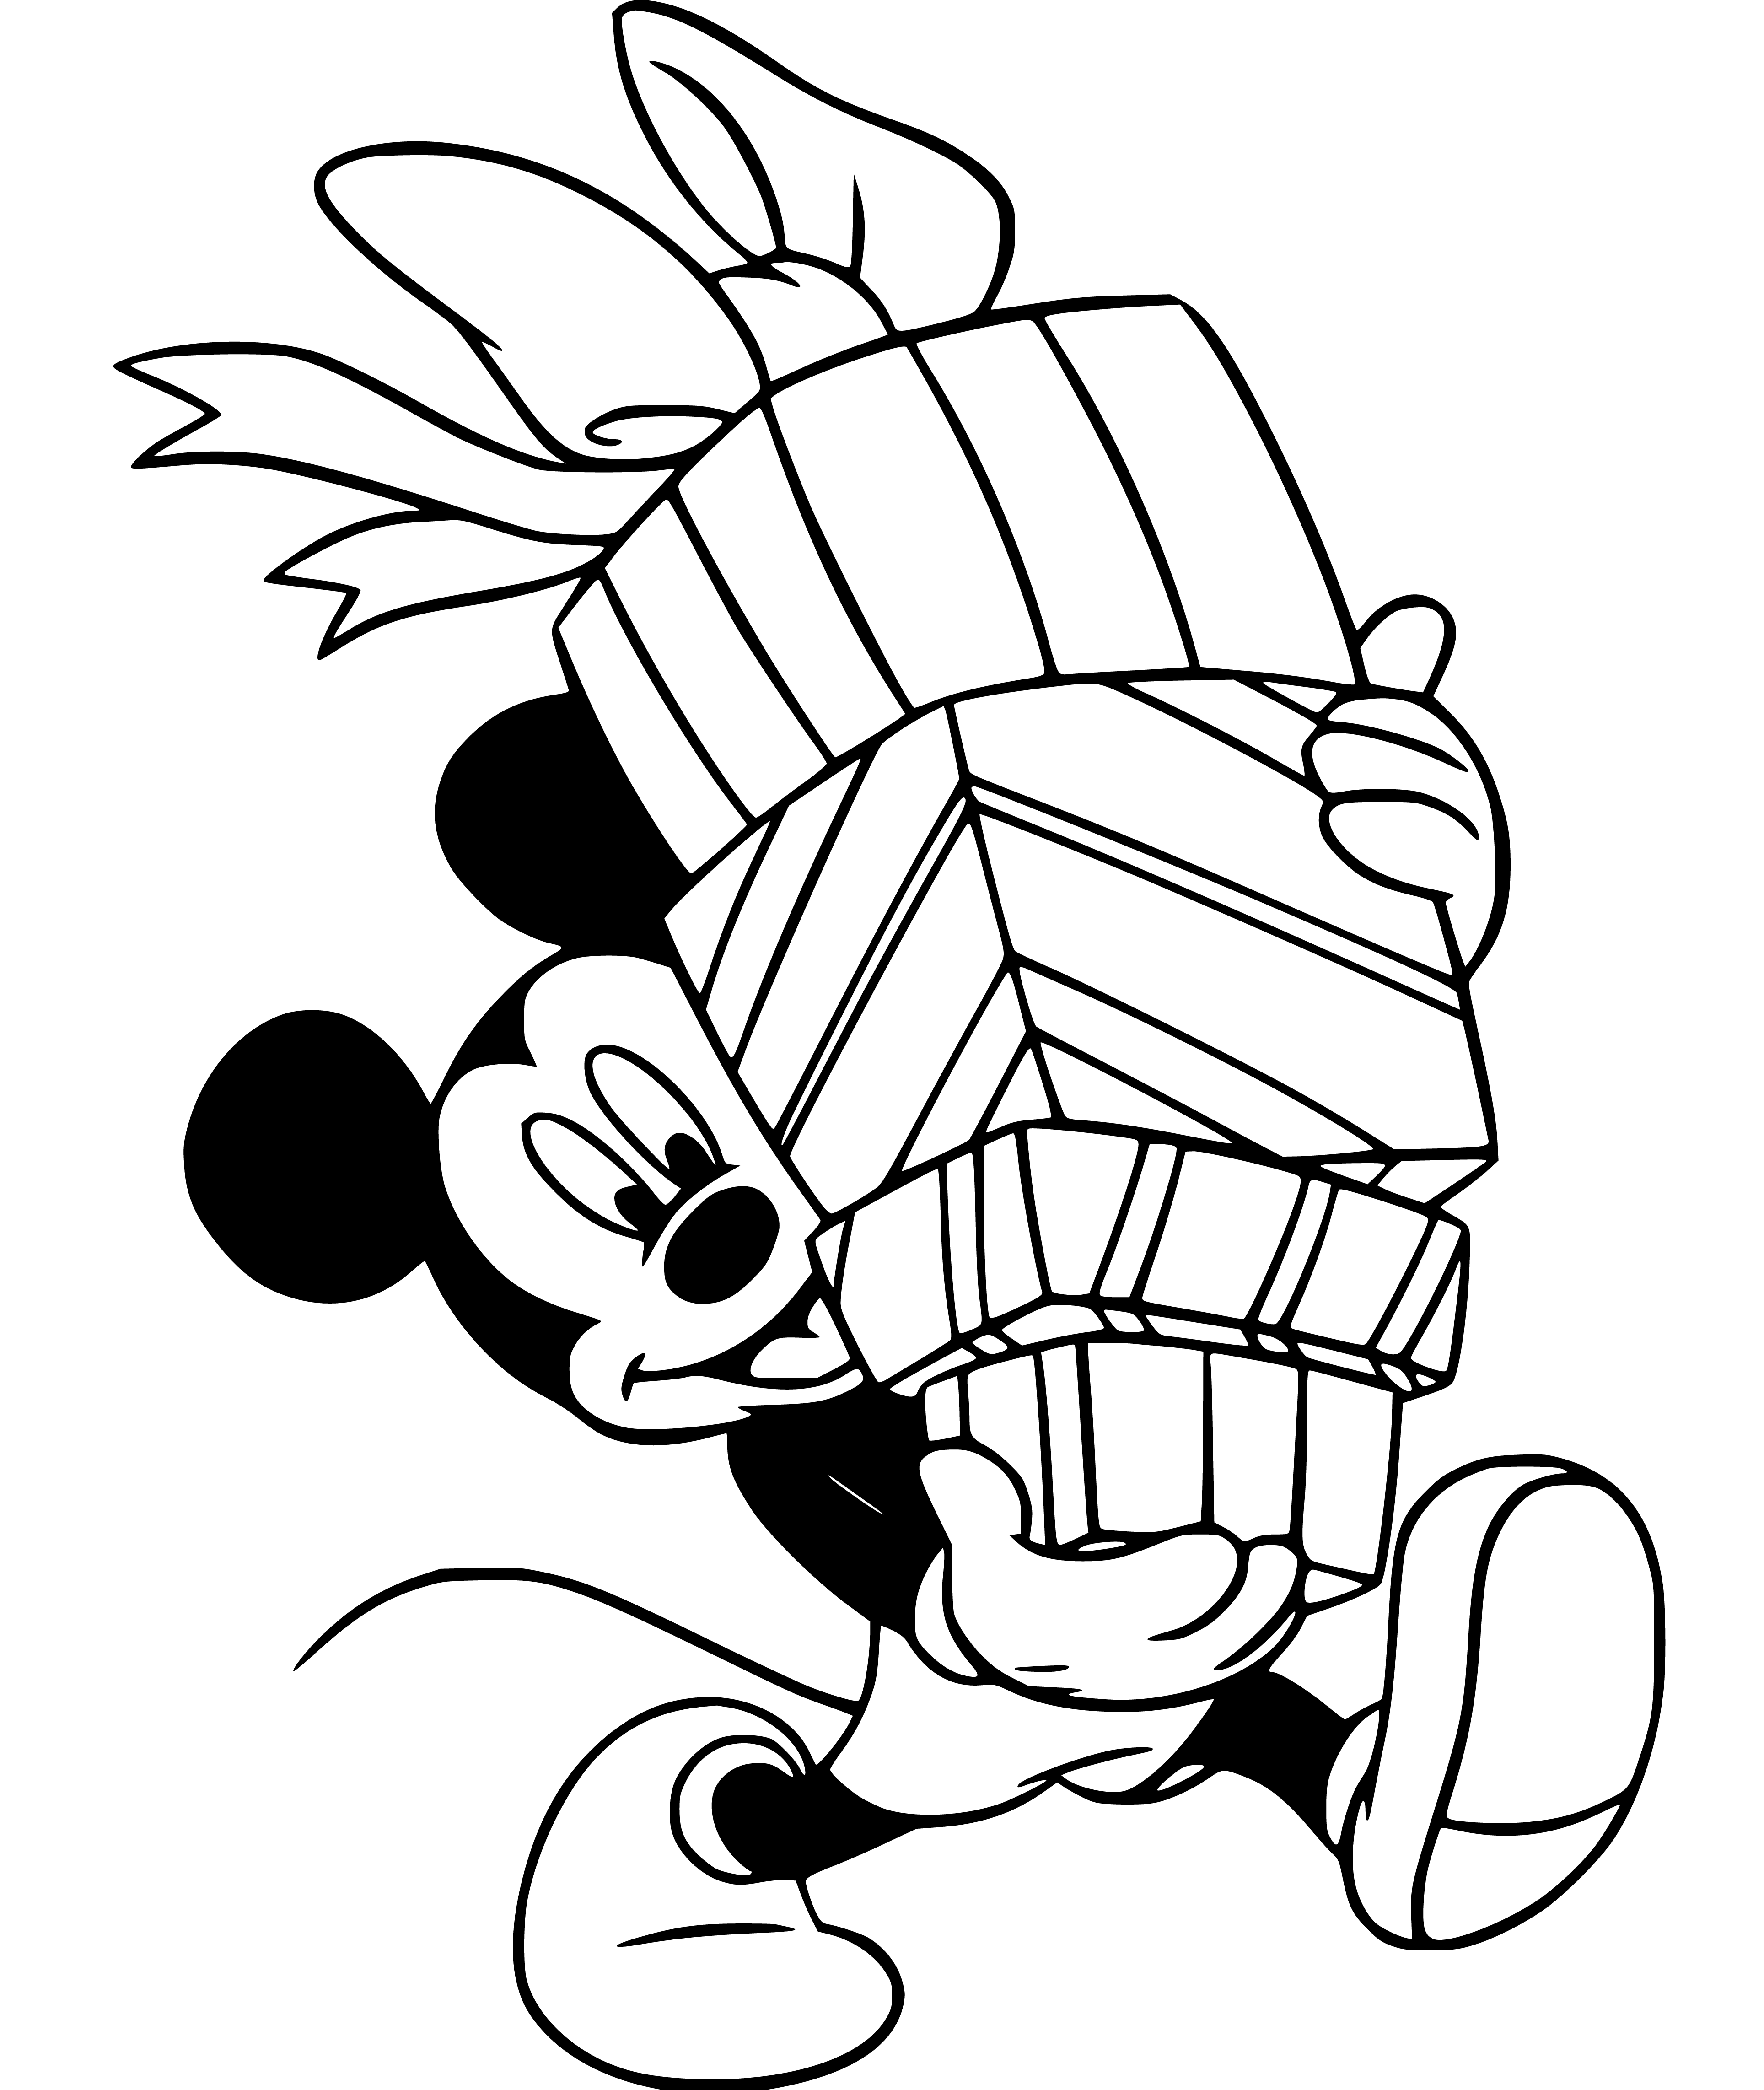 Mickey Mouse holding Gifts Coloring sheet - SheetalColor.com